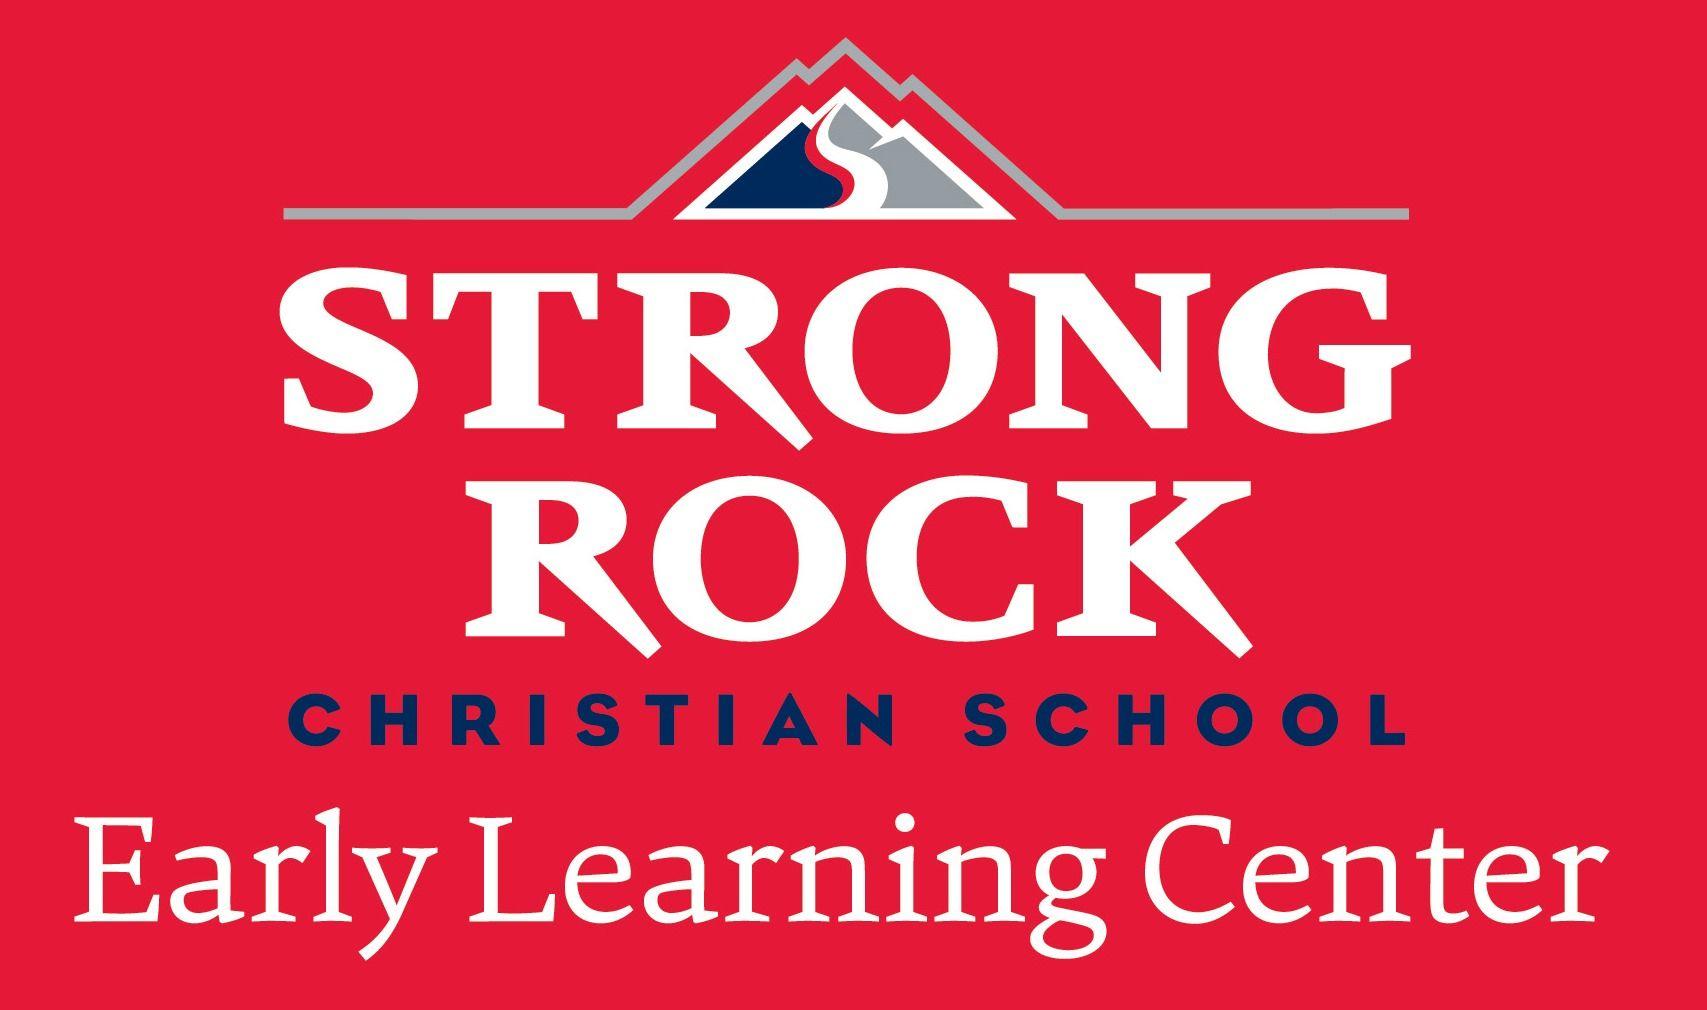 Strong Rock Logo - Strong Rock is a Private Christian School in Henry County GA